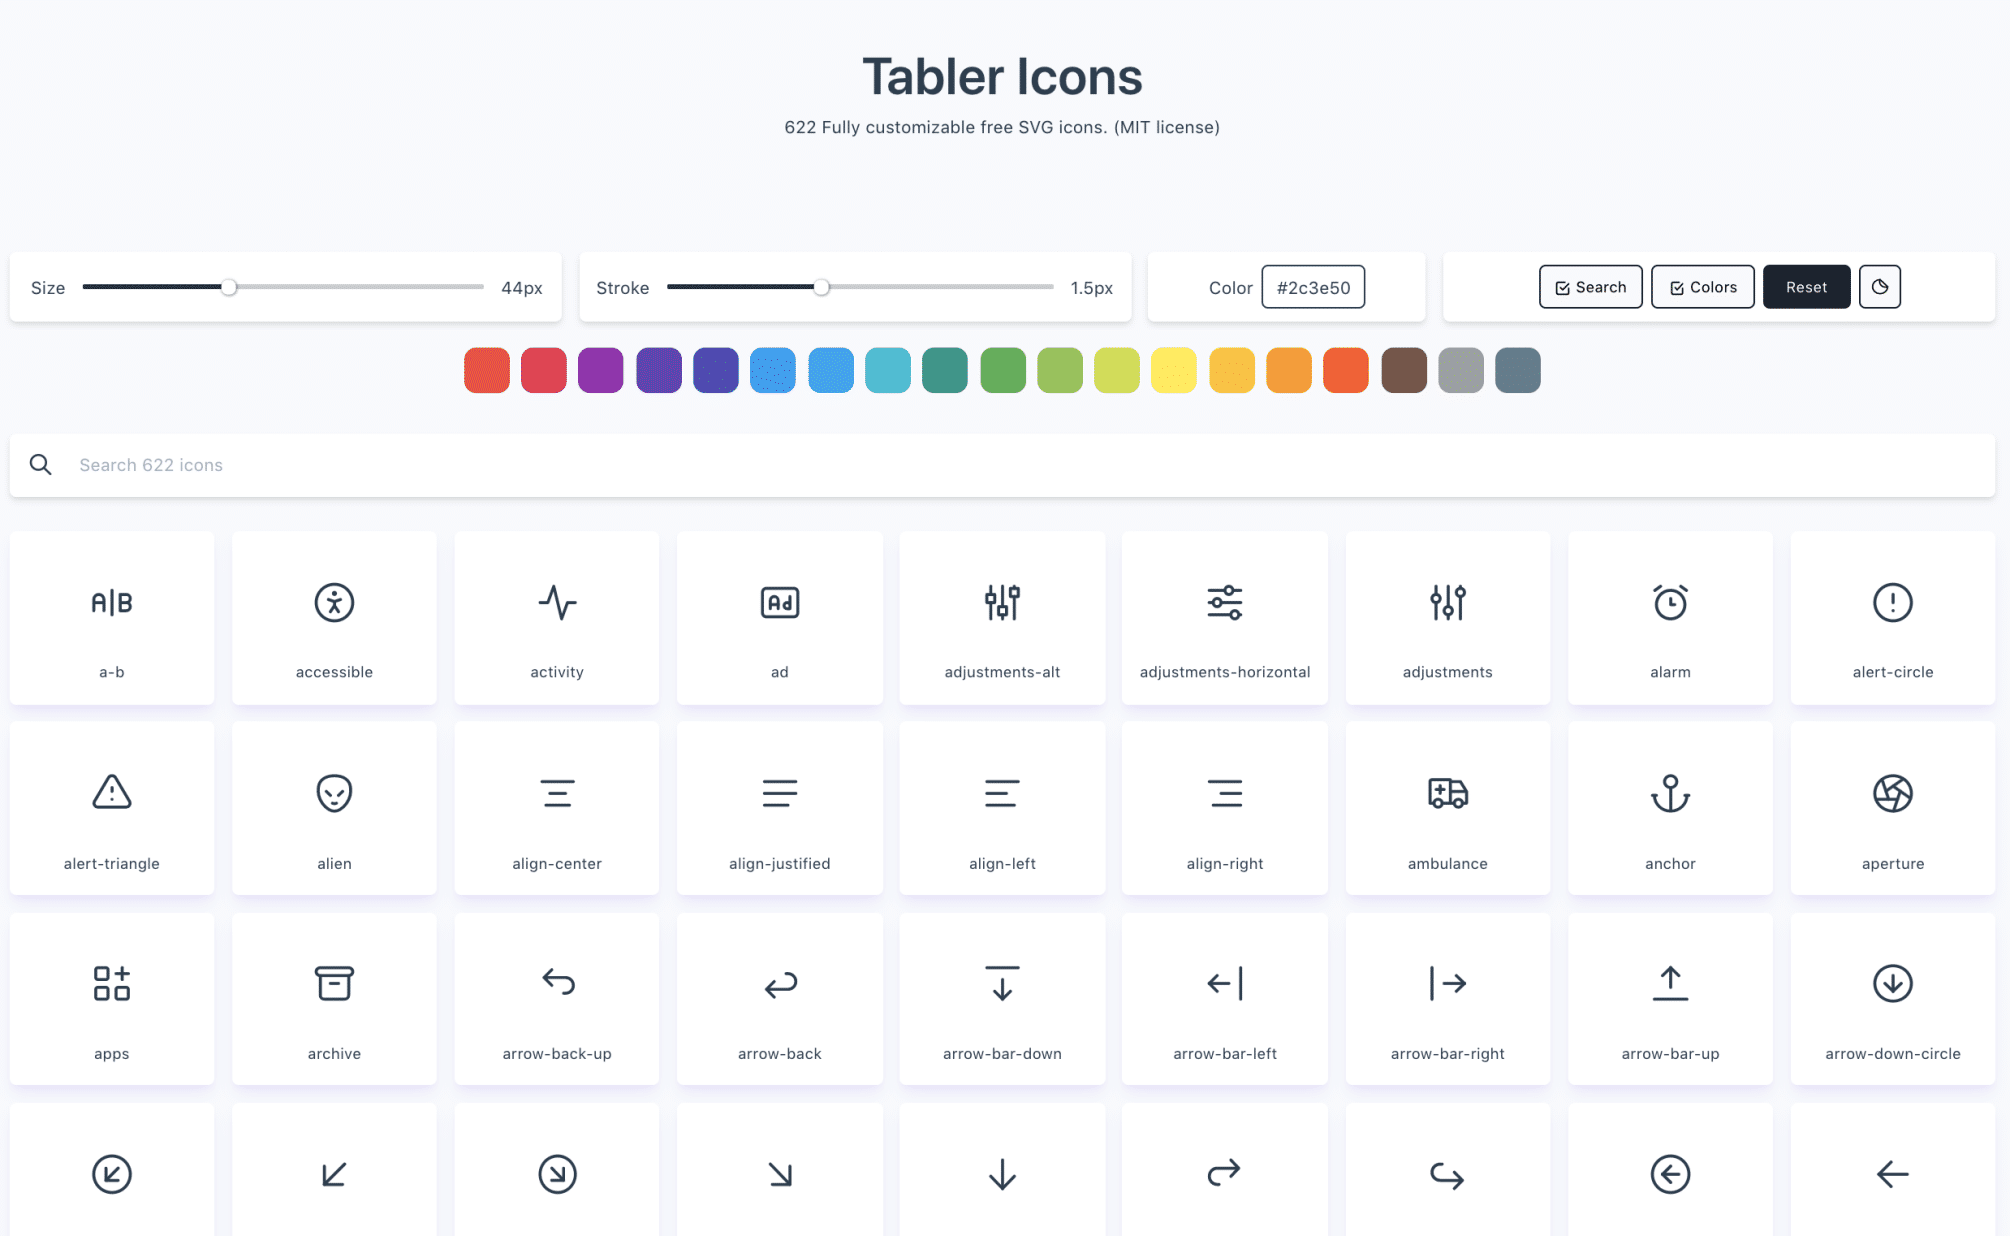 TABLER ICONS